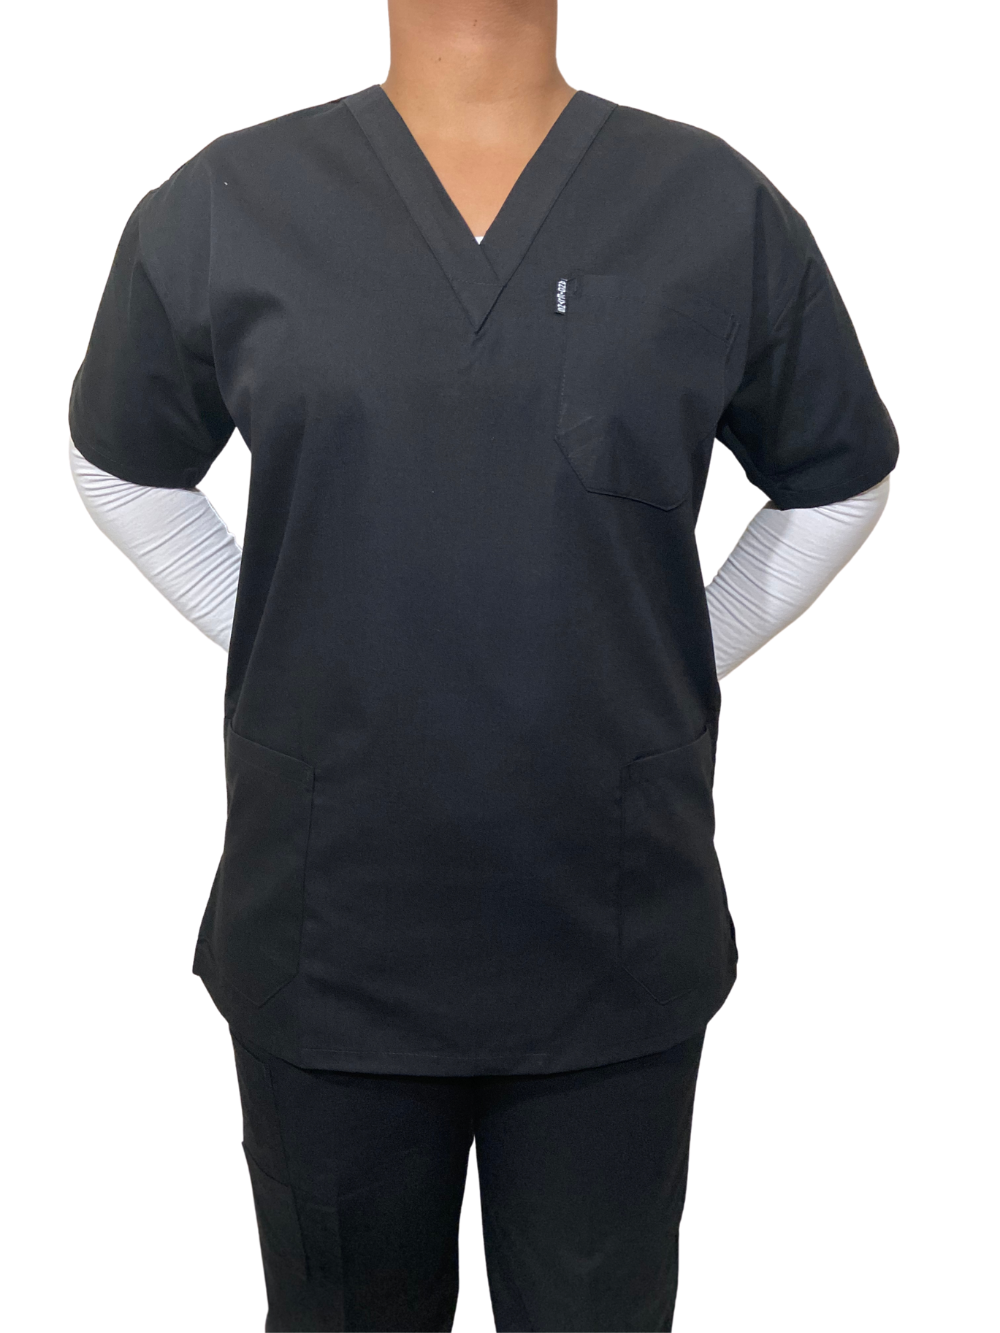 https://angielynscollections.com/wp-content/uploads/2020/08/medical-black-scrubs-top.png